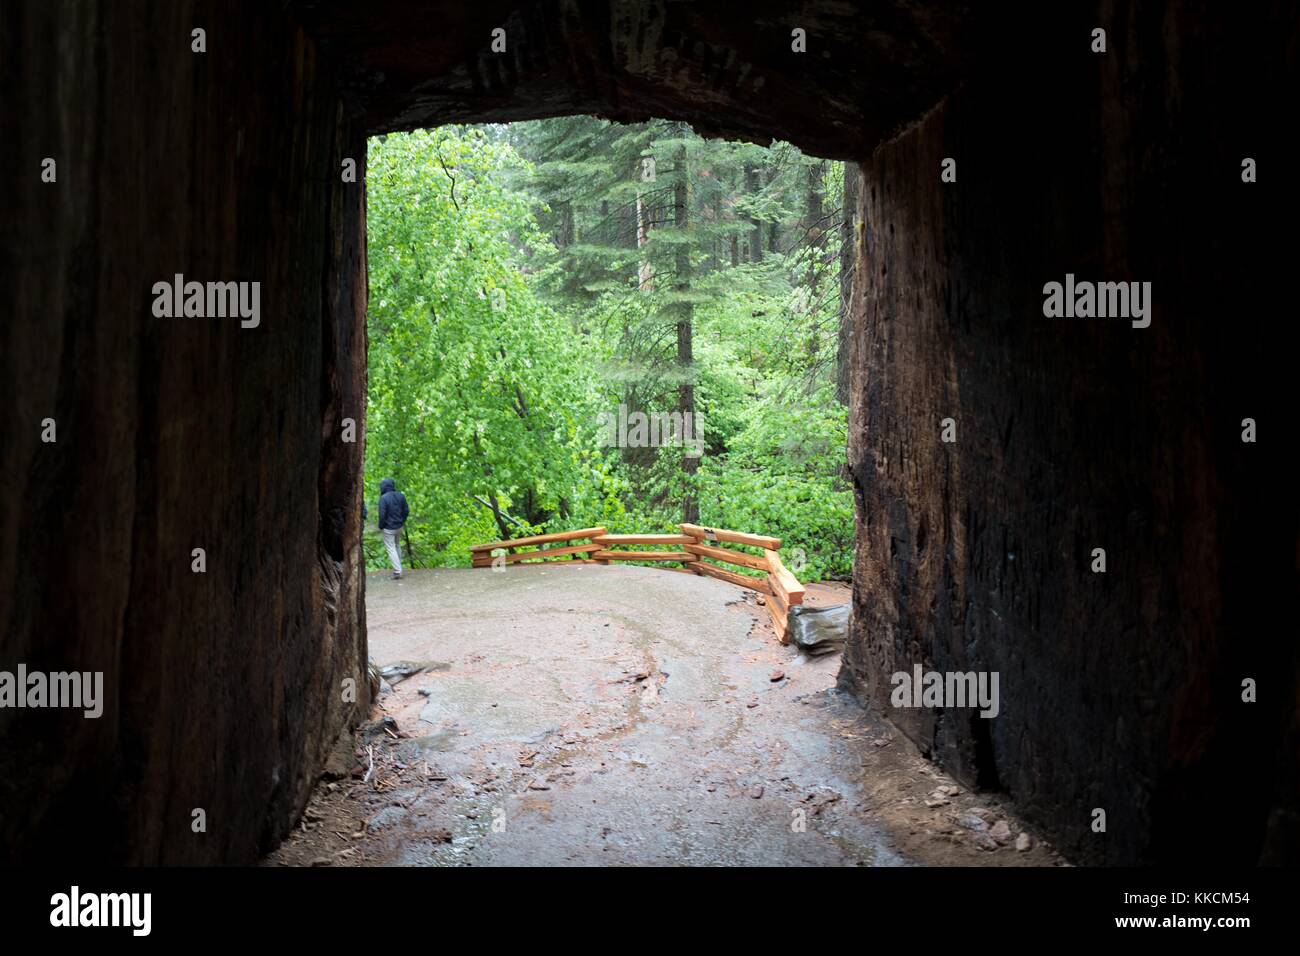 View through the interior of the Tunnel Tree, a giant sequoia redwood tree through which a walking tunnel has been carved, in the Tuolumne Grove of Yosemite National Park, Yosemite Valley, California, 2016. Stock Photo